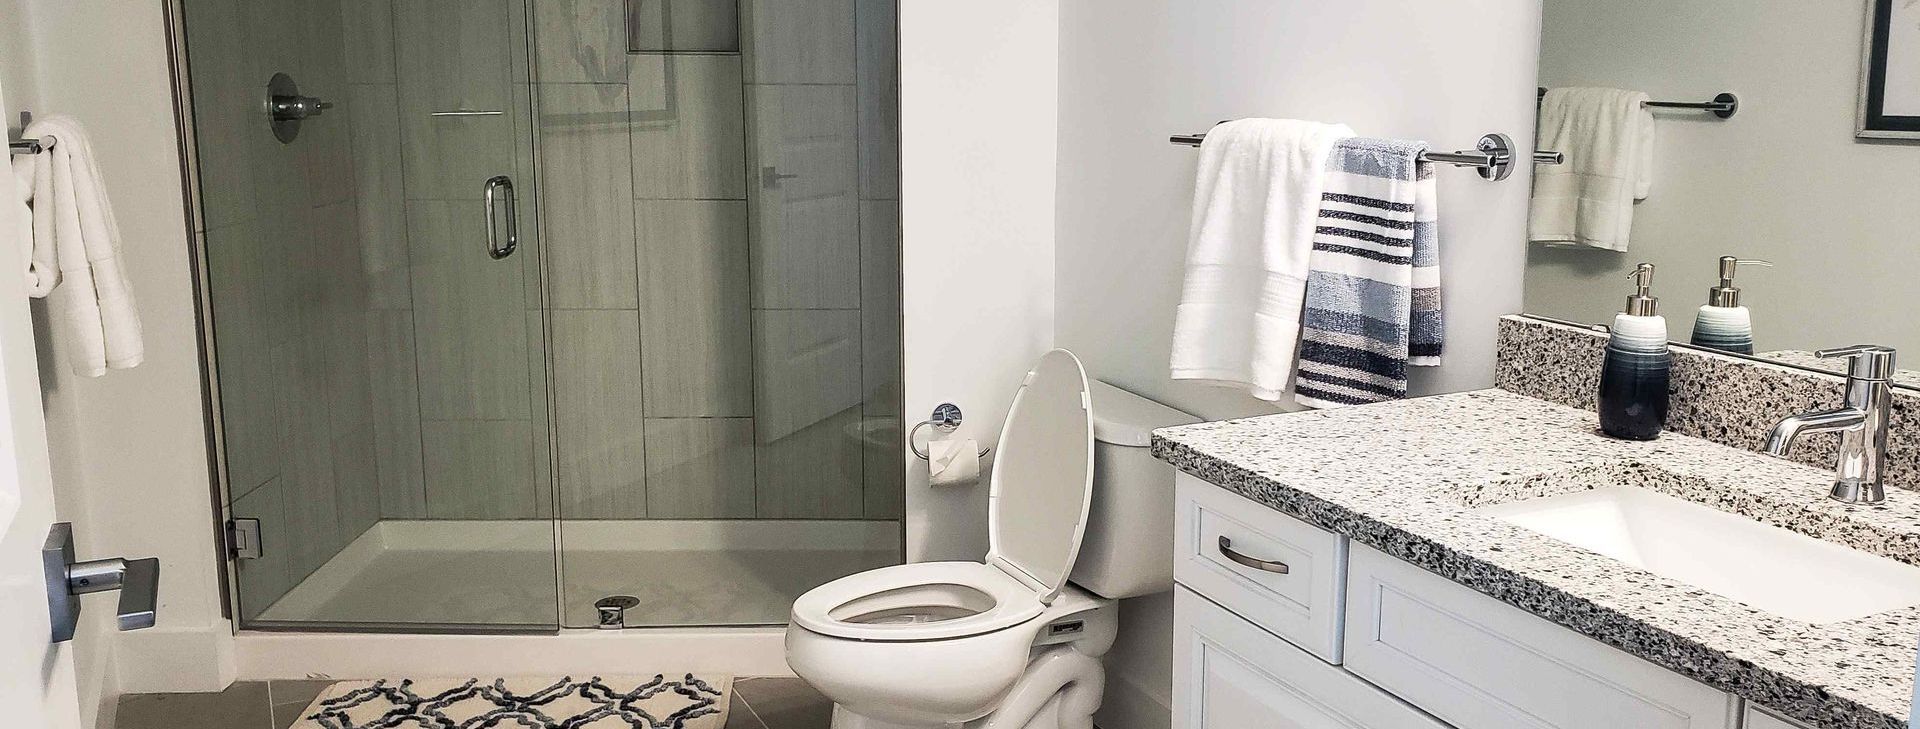 Bathroom With GFCI Outlets